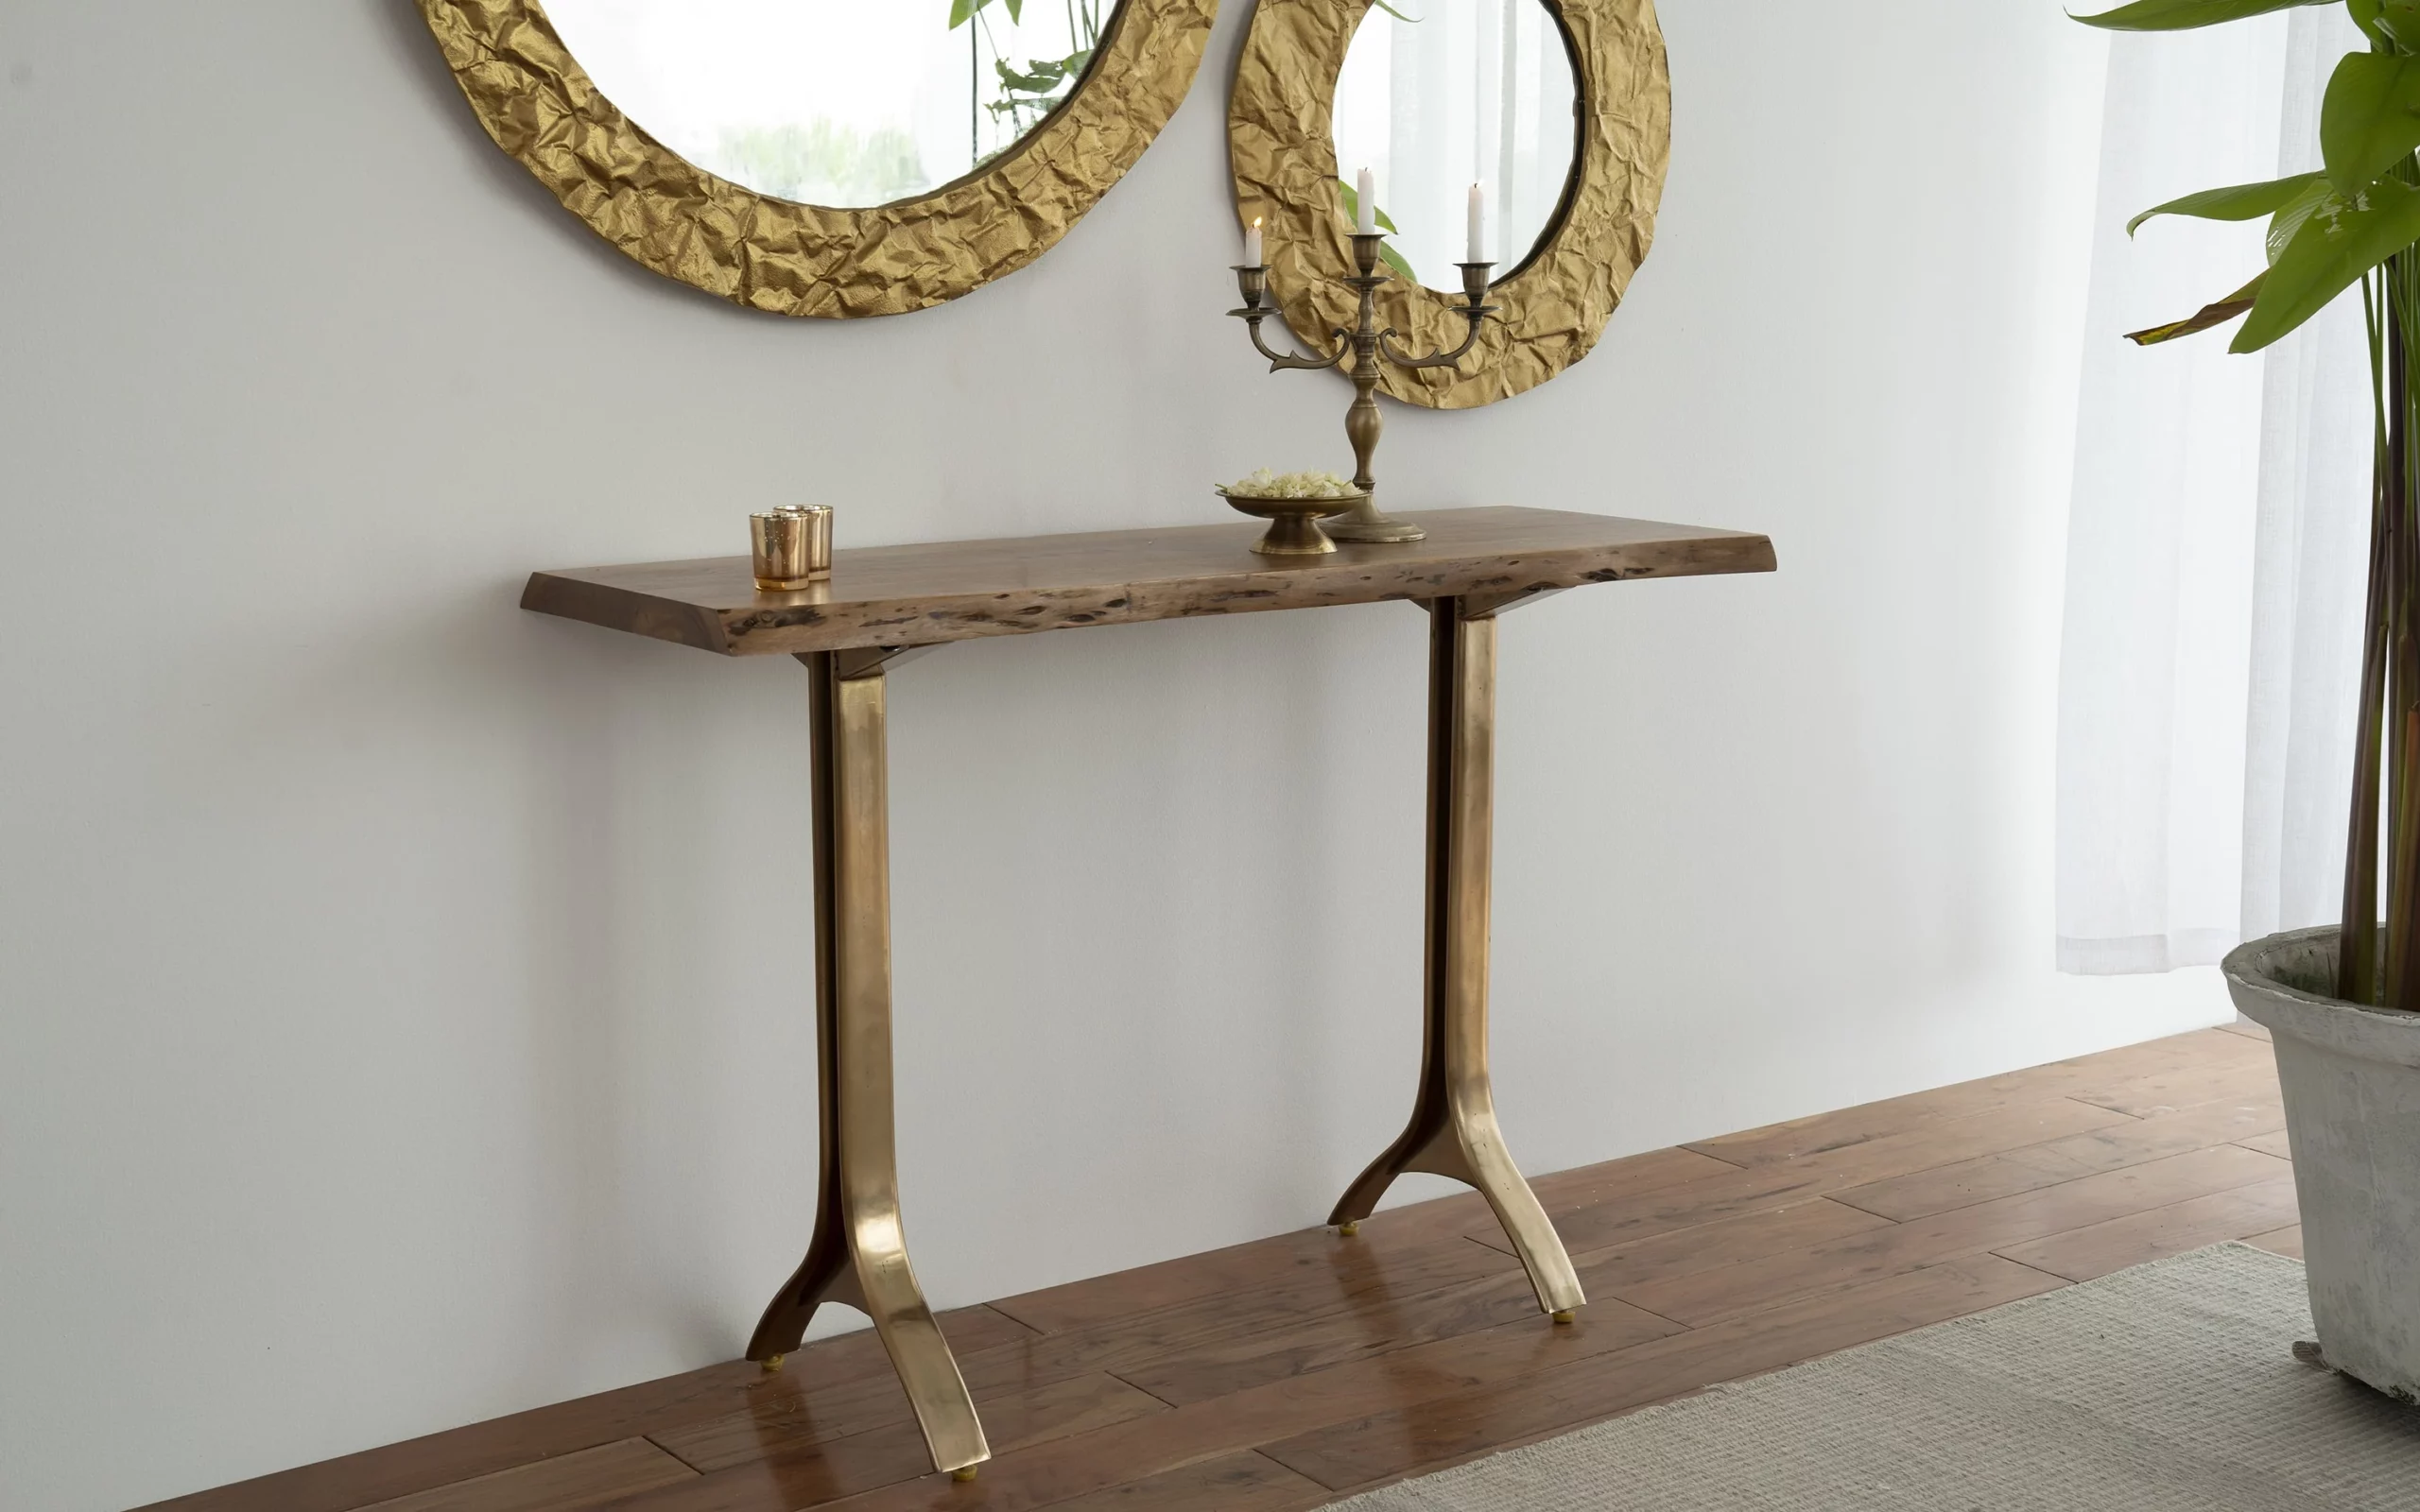 Made in a raw tone with Acacia wood in a Natural finish, designer mirrors hanging above the table